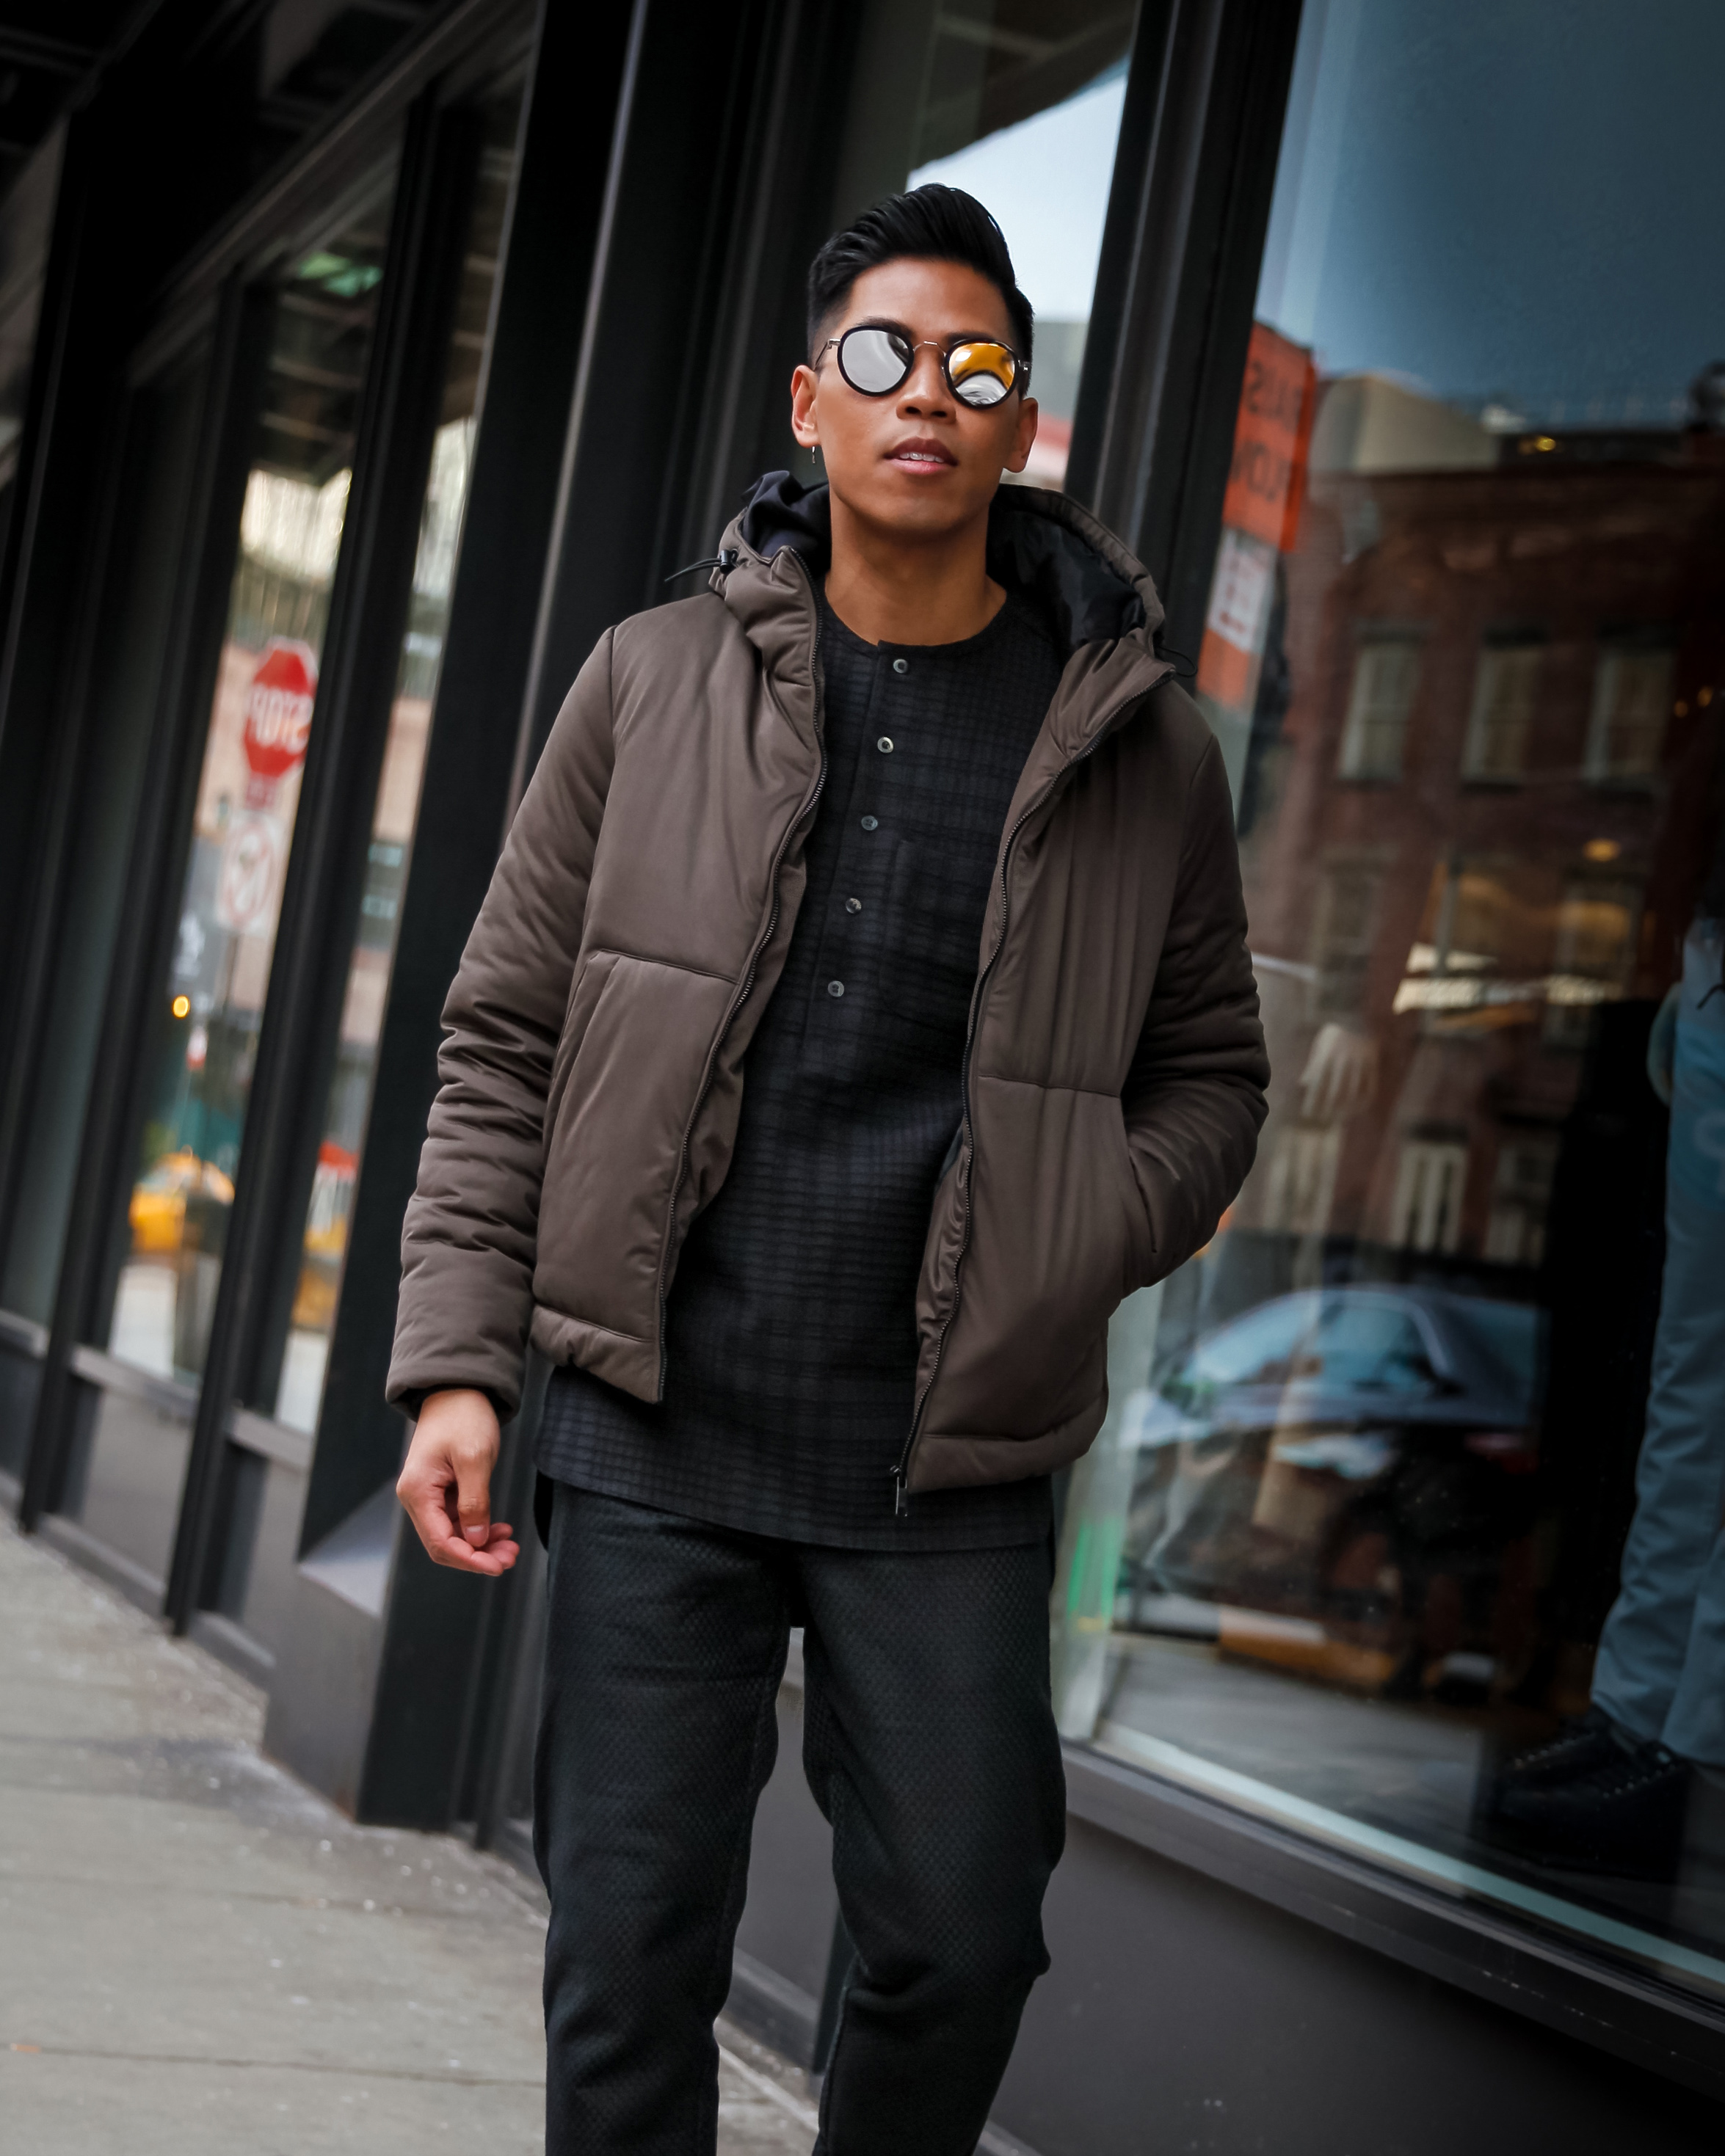 matiere collection street style outfit